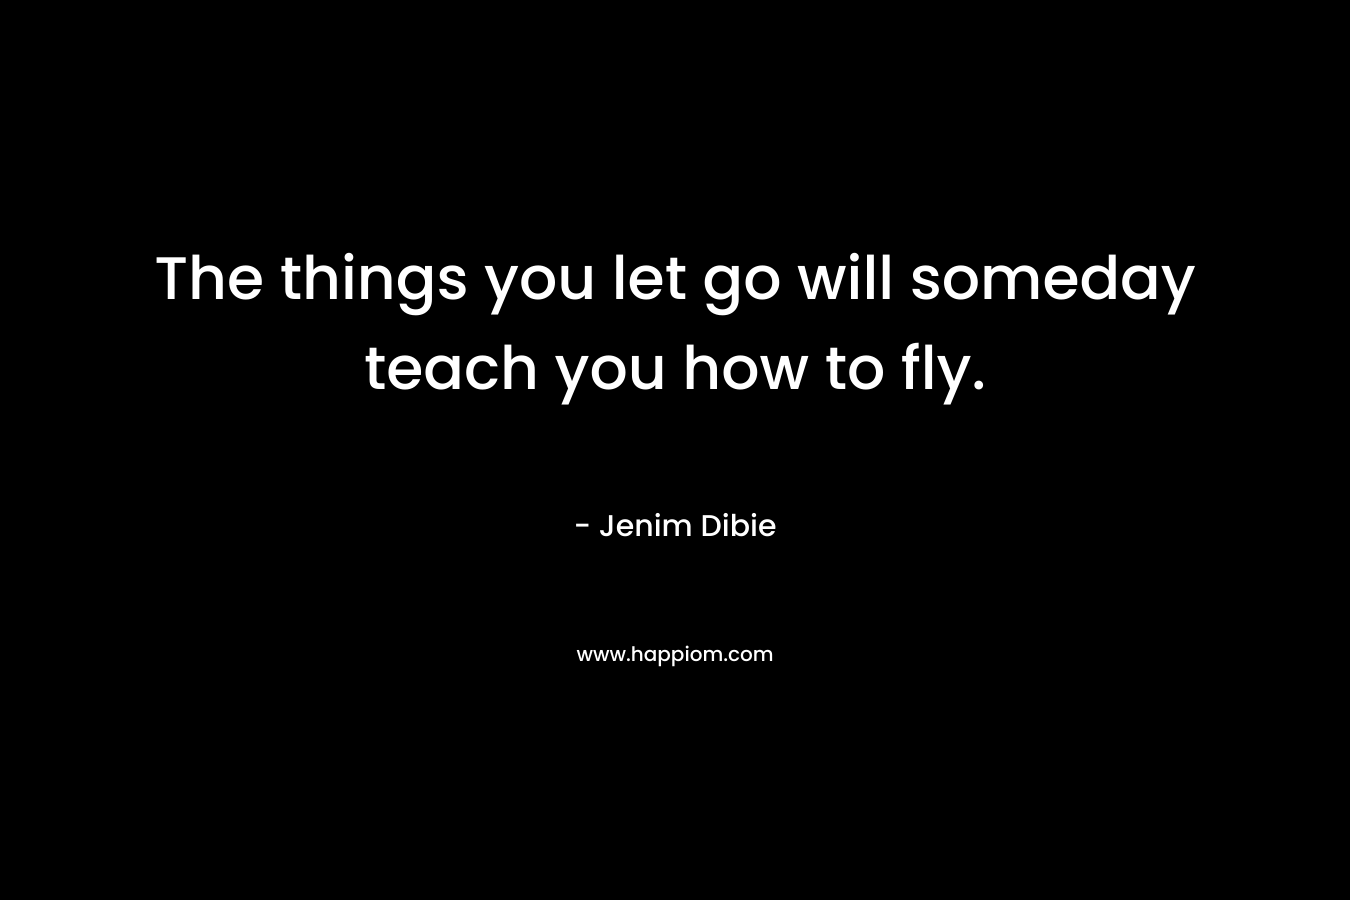 The things you let go will someday teach you how to fly.